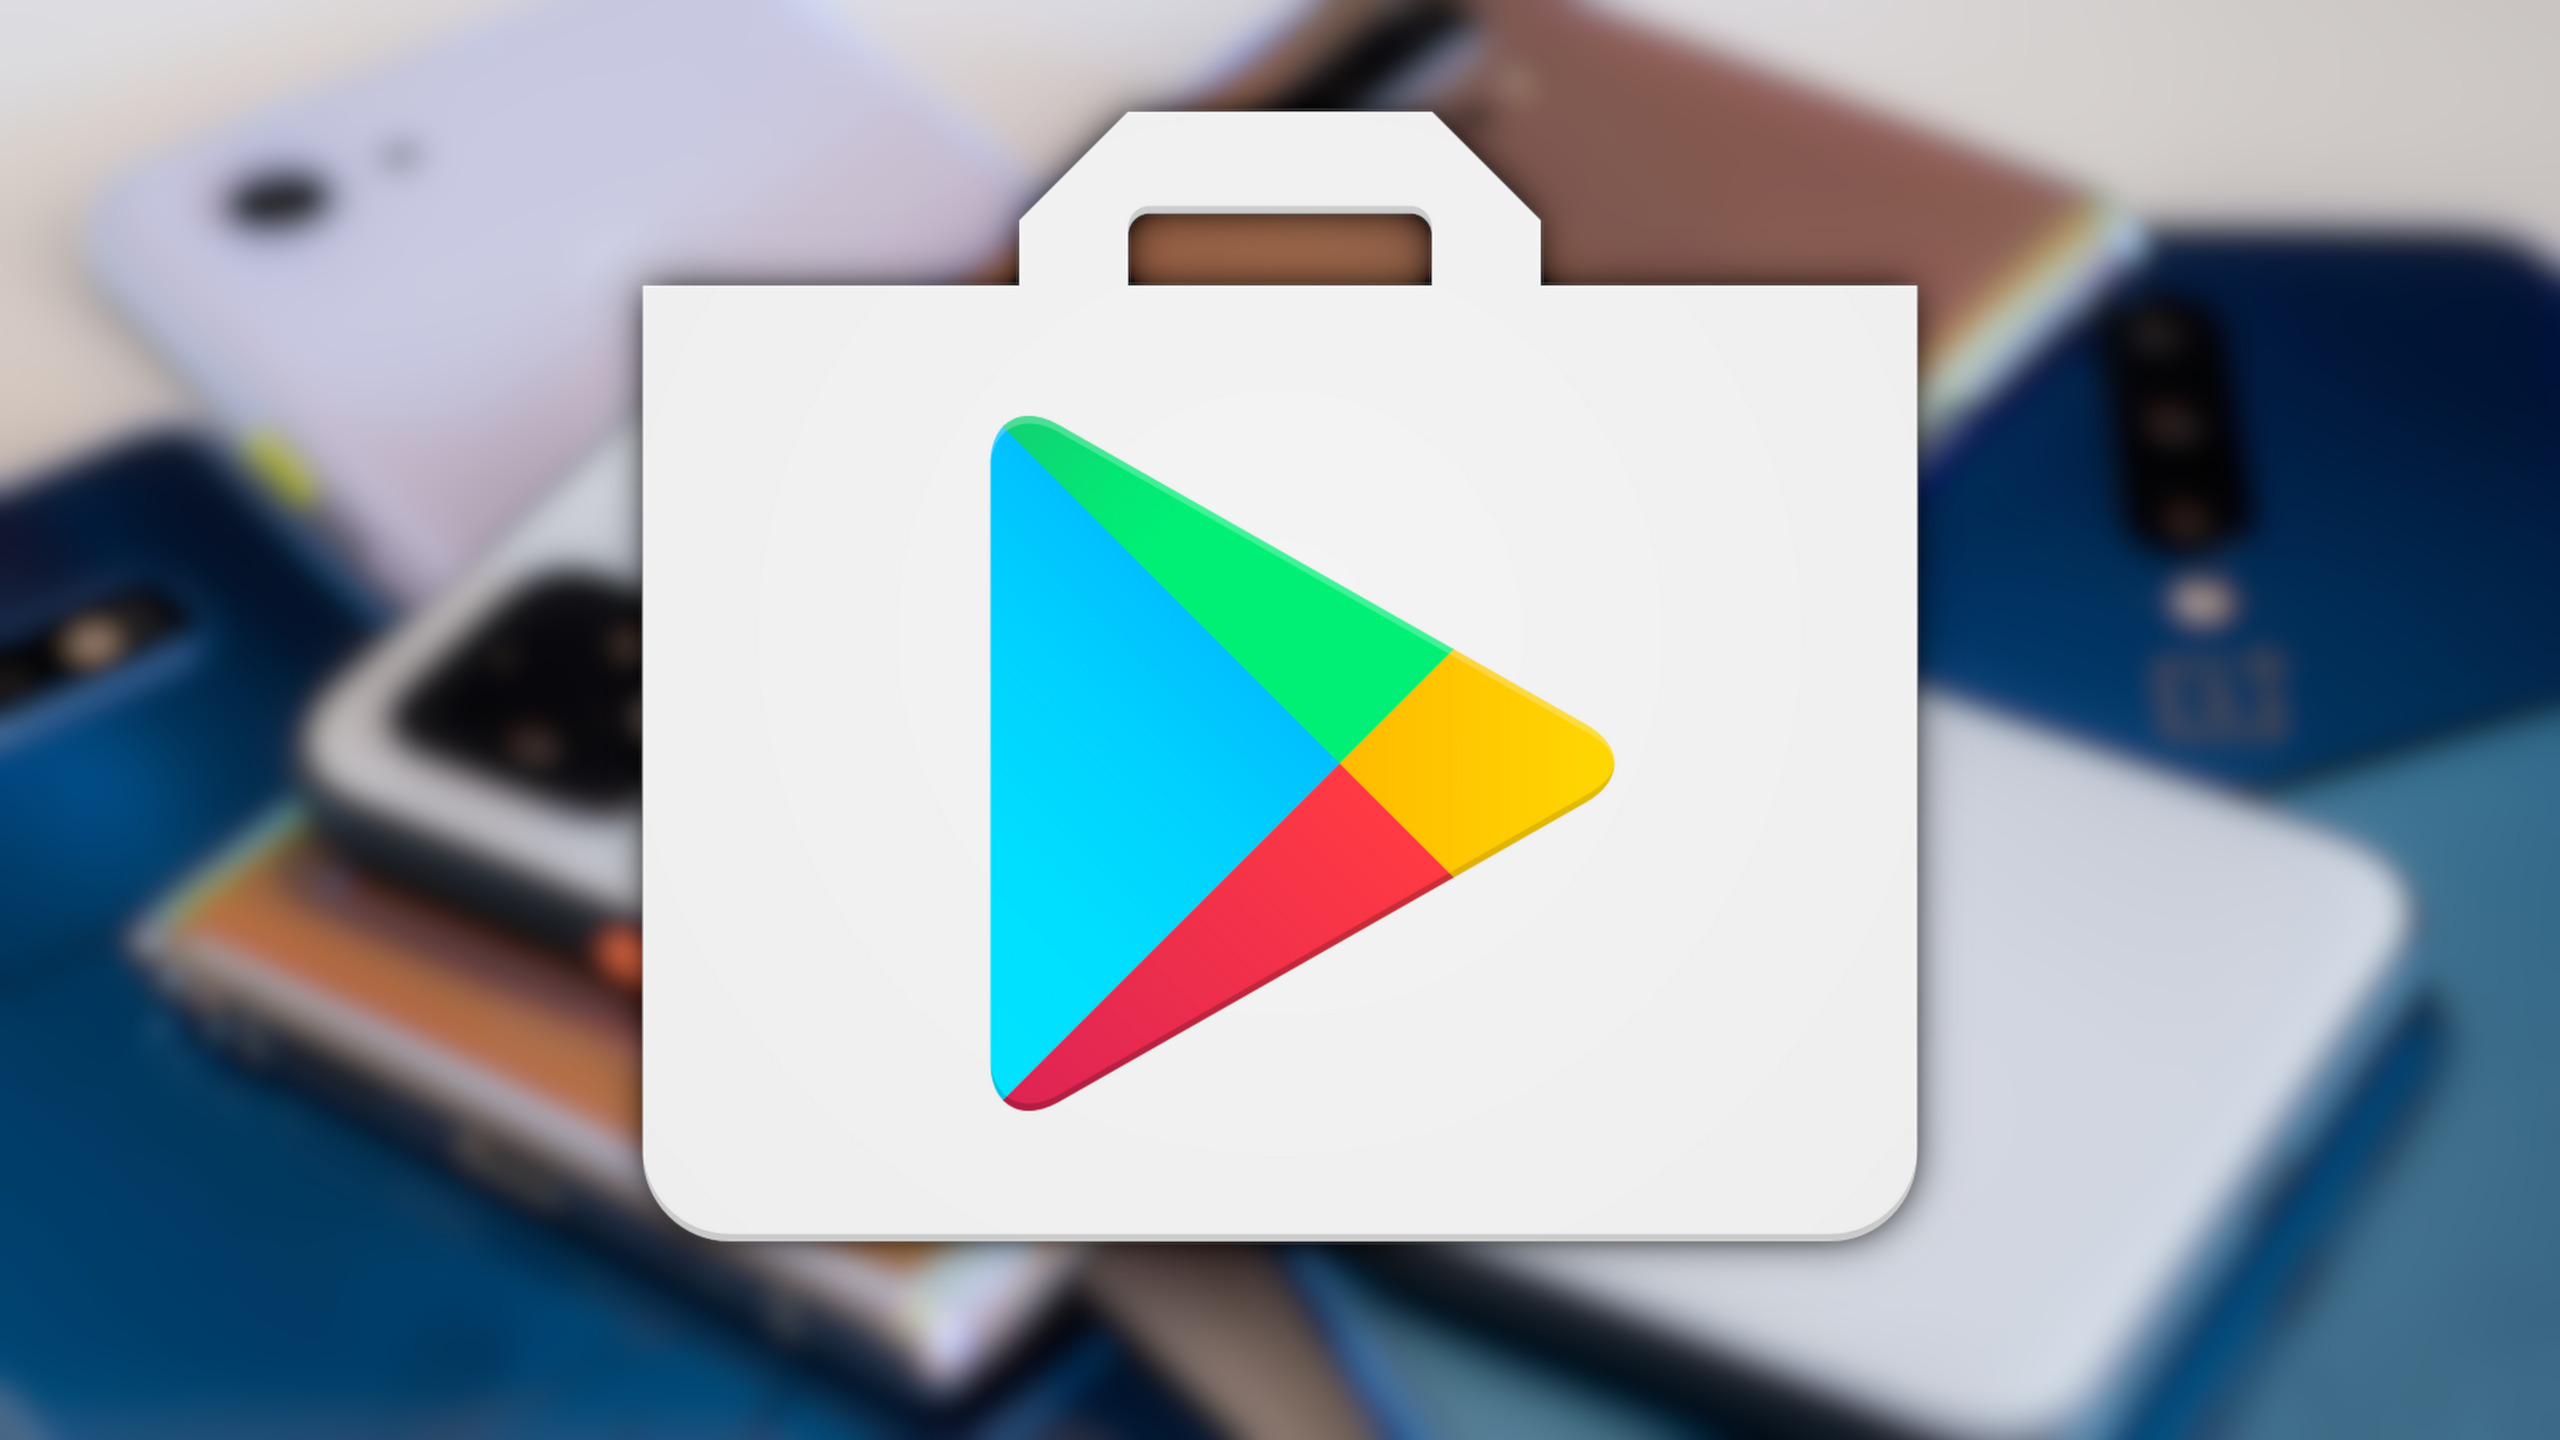 google play store free download for pc windows 10